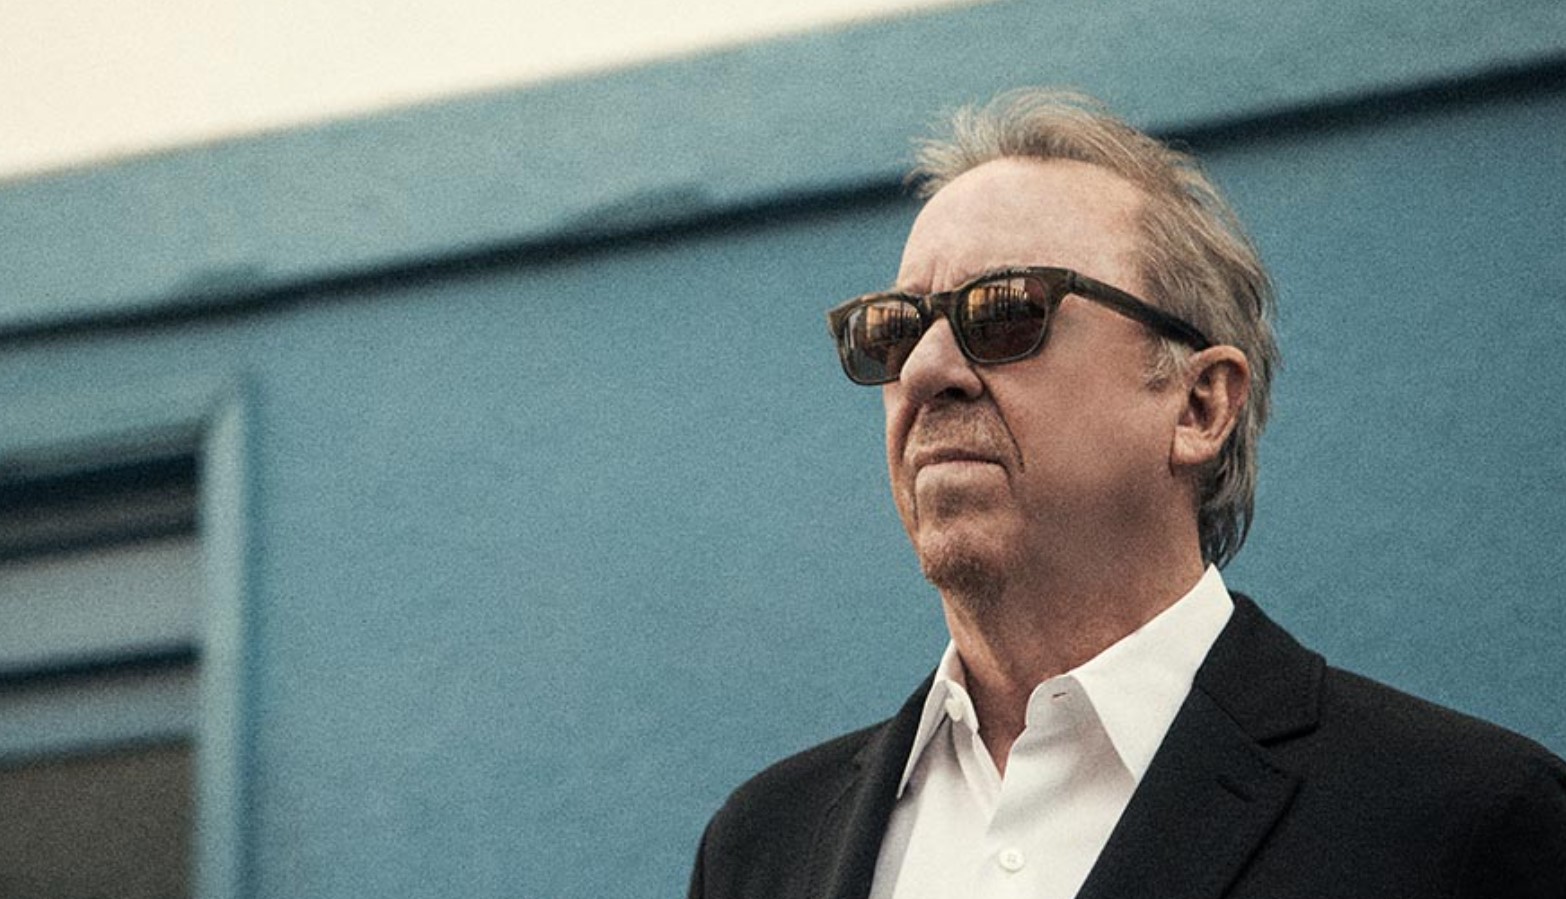 Boz Scaggs with Special Guest Keb' Mo' at Ravinia Festival